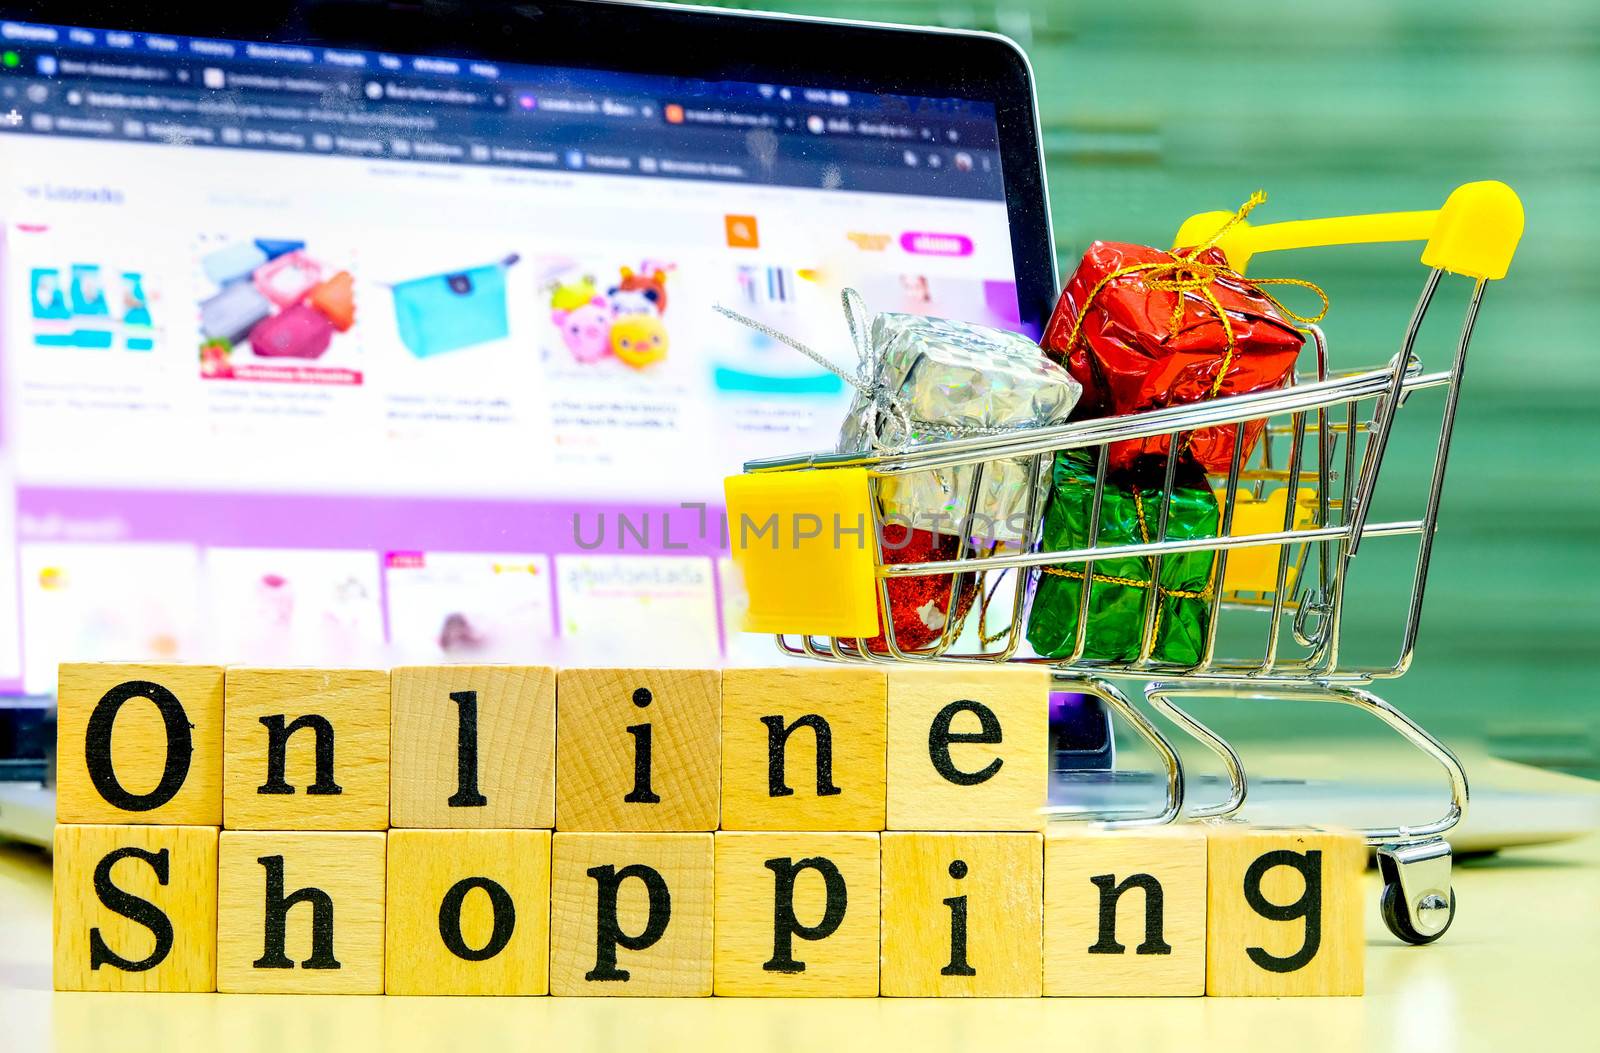 Wooden Alphabet "online shopping" and shopping cart with full of presents or gifts in front of the Blur Shopping Online Website on Laptop